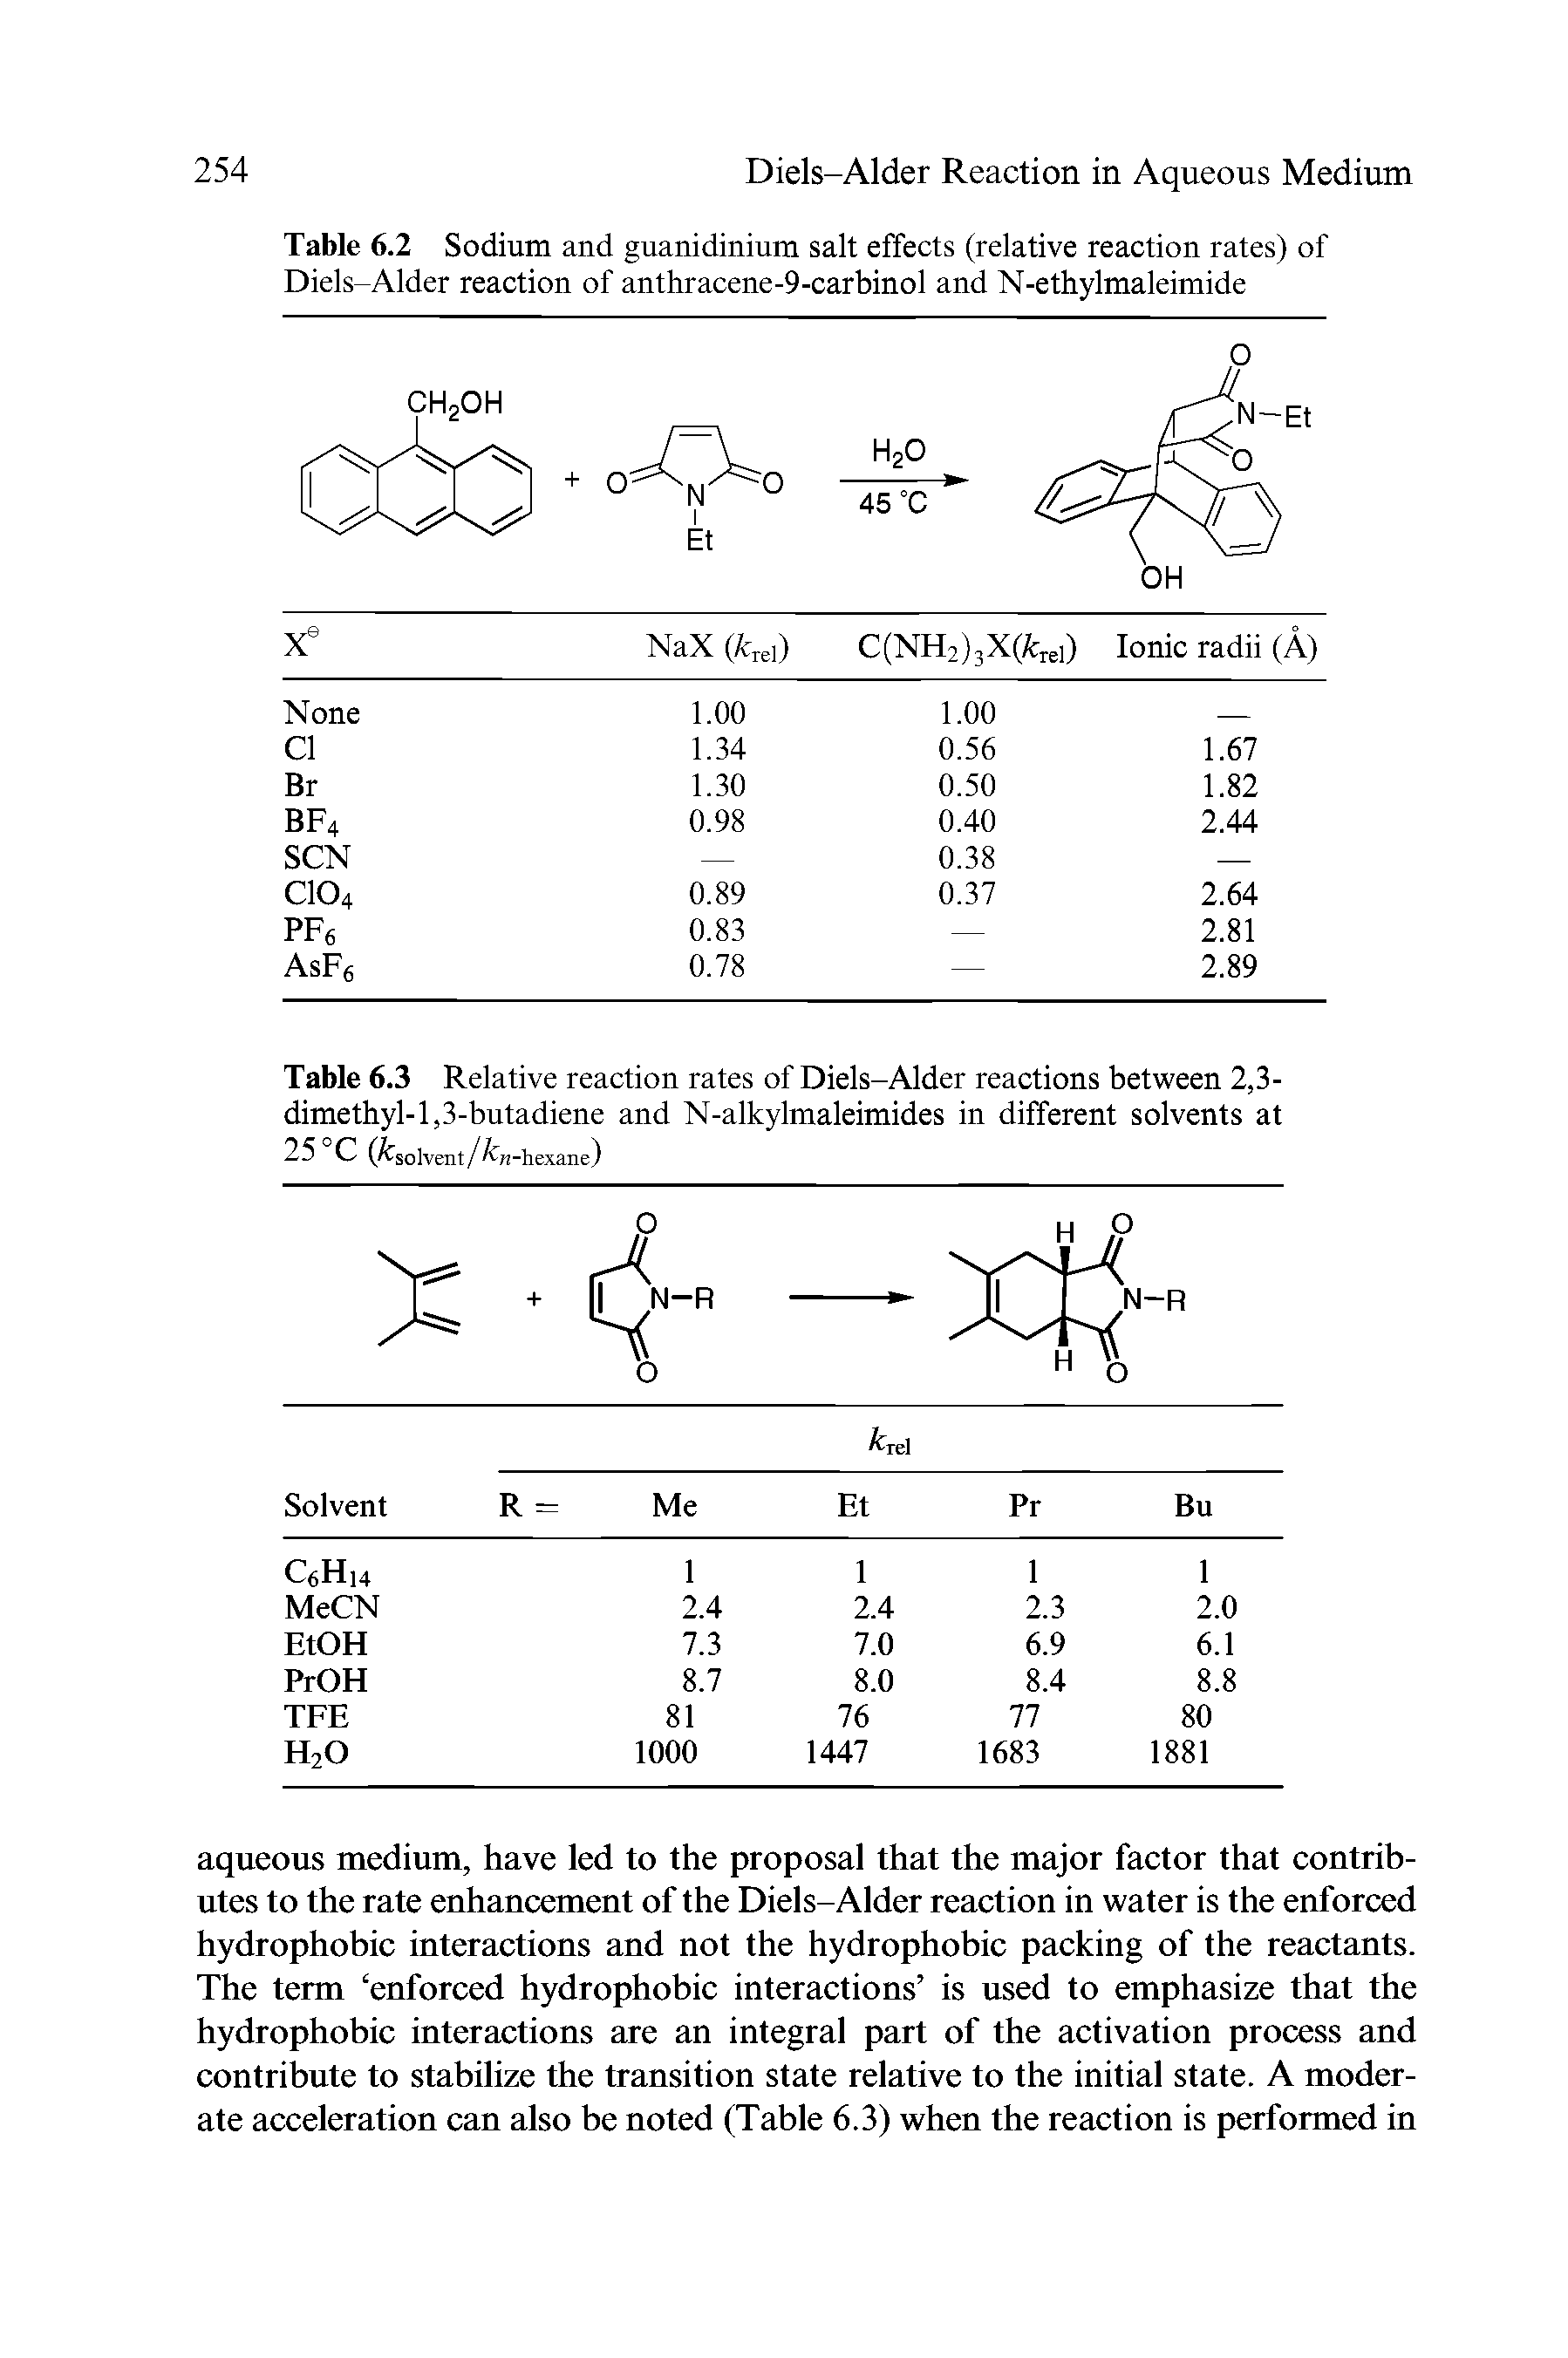 Table 6.3 Relative reaction rates of Diels-Alder reactions between 2,3-dimethyl-1,3-butadiene and N-alkylmaleimides in different solvents at...